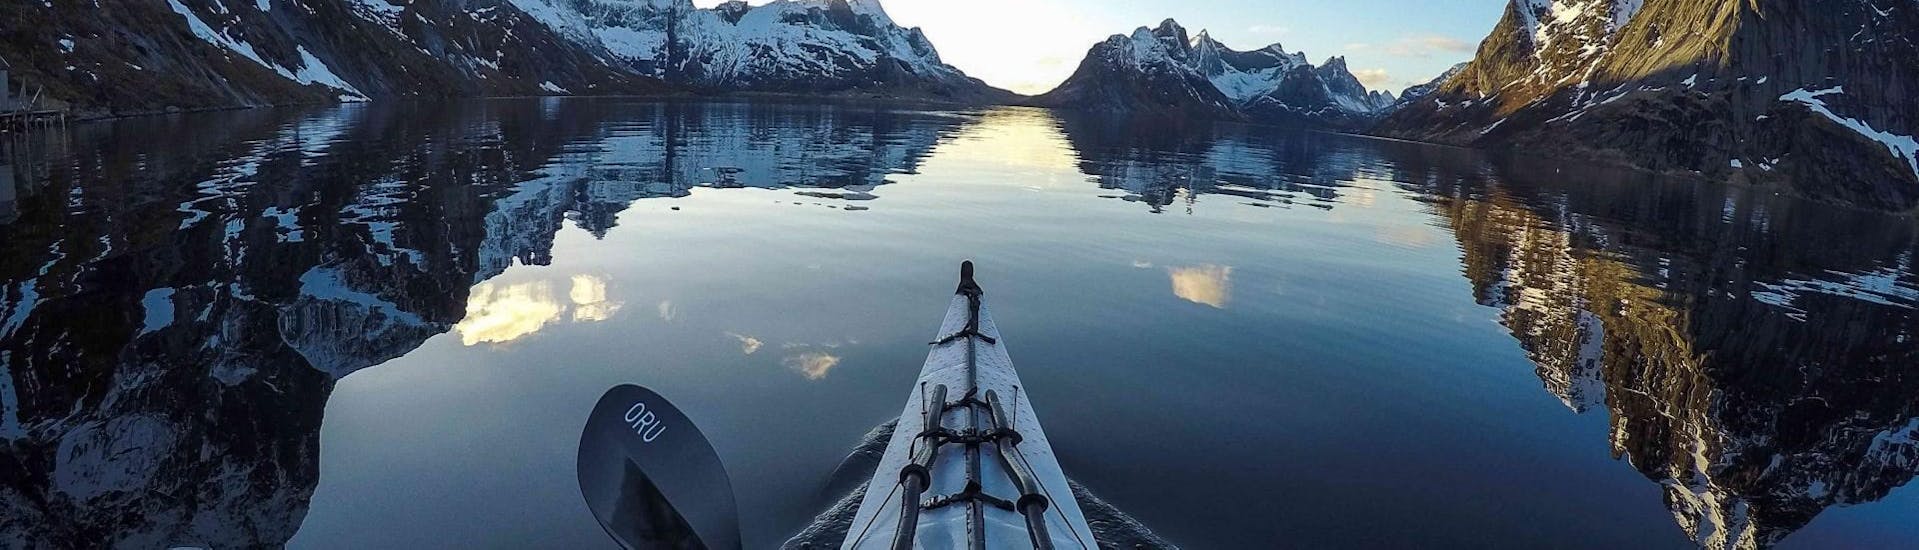 The Sea Kayak Tour "Winter" in Lofoten led by an experienced guide from Northern Explorer offers stunning views of the Lofoten Islands.